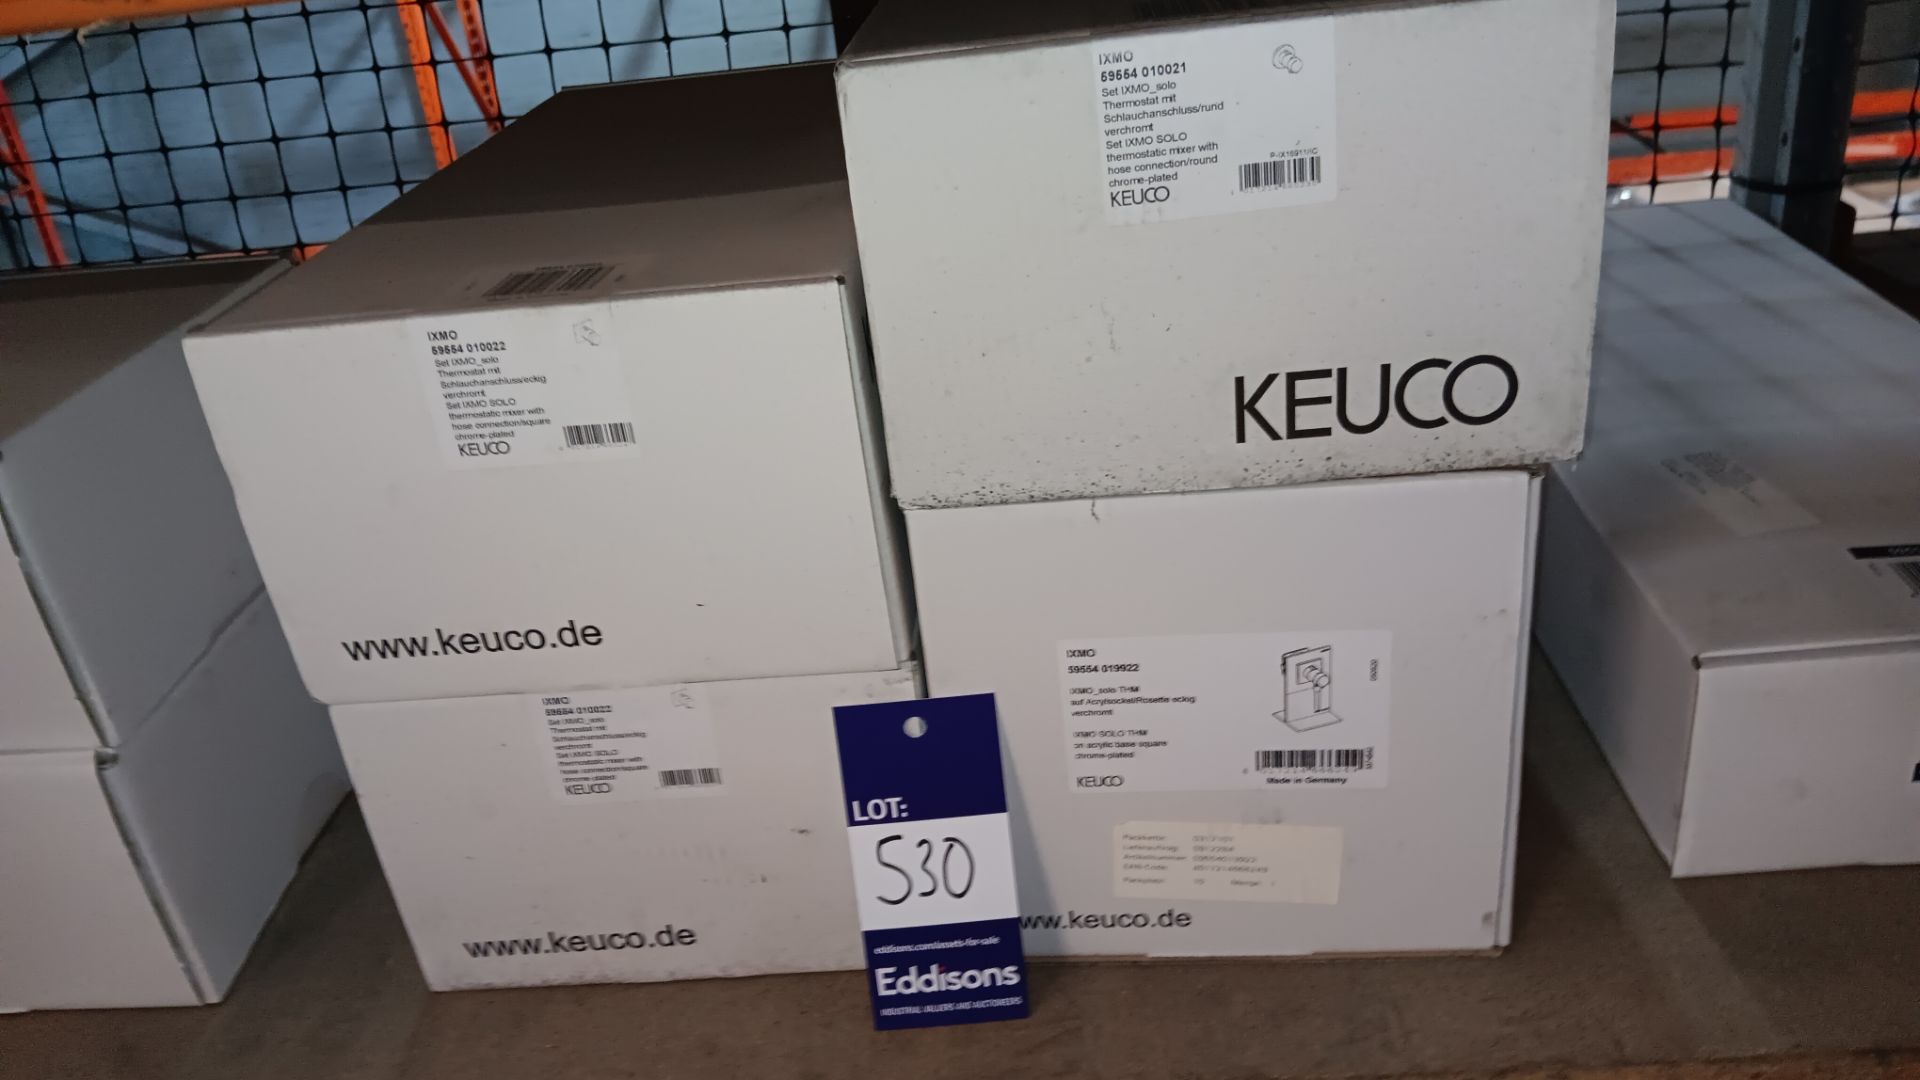 4 x Various Keuco thermostatic mixers - Please see photo for full description. LOCATED ON MEZZANINE,